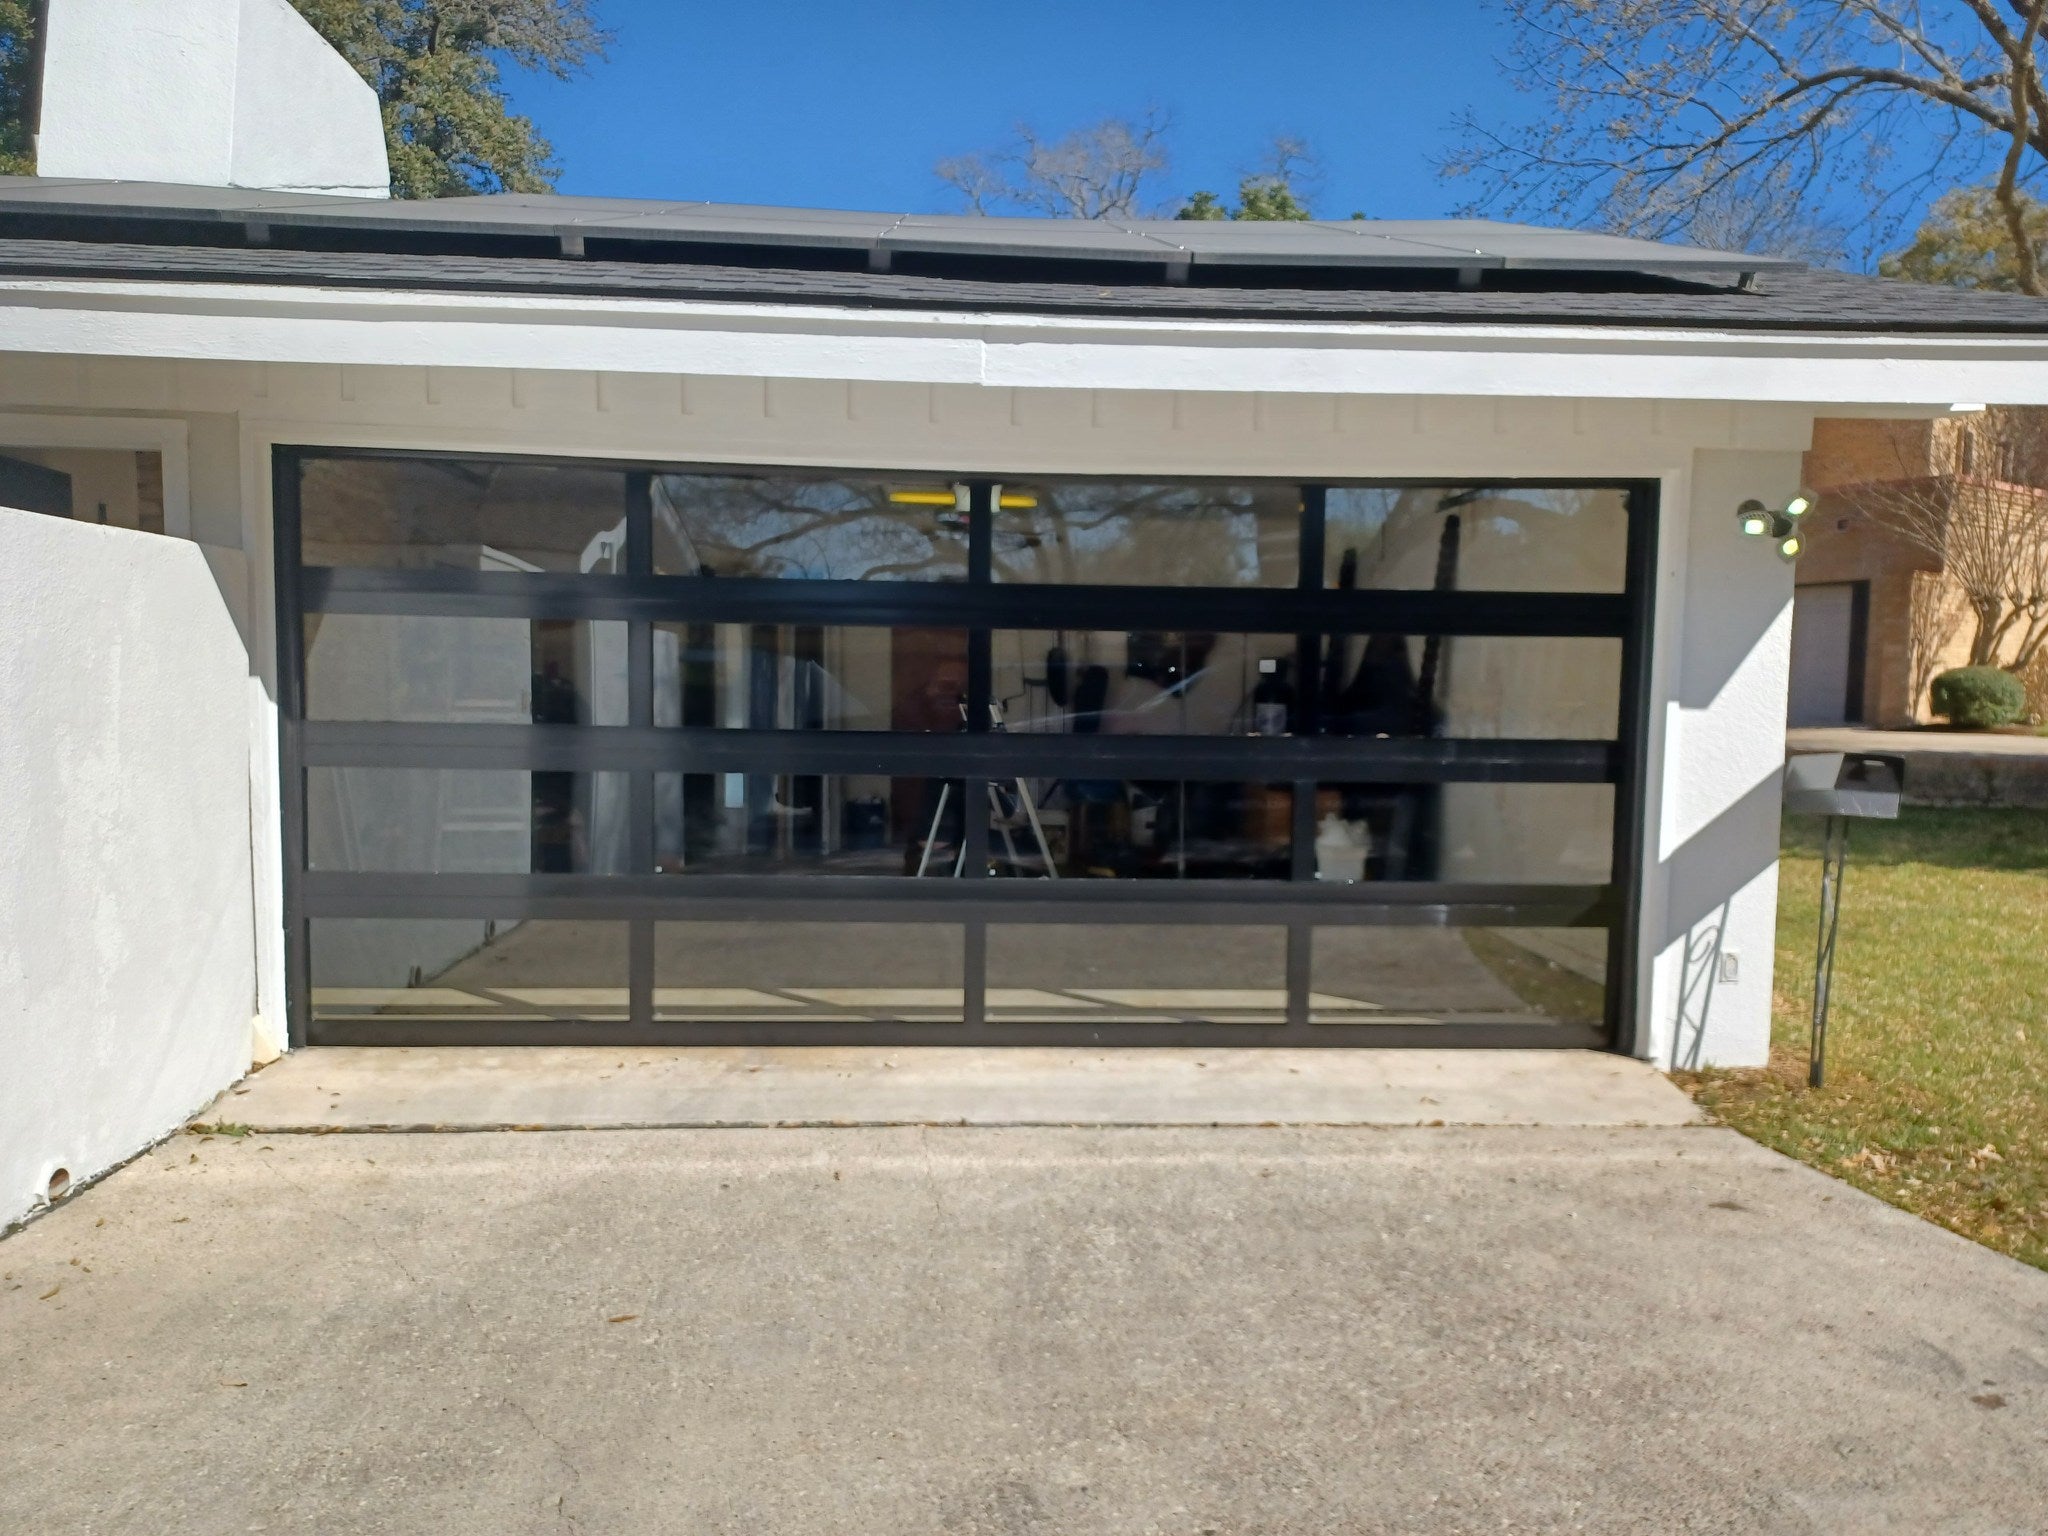 16 FT Wide By 7 FT Tall Full View Garage Door Matt Black Finish With Clear Glass